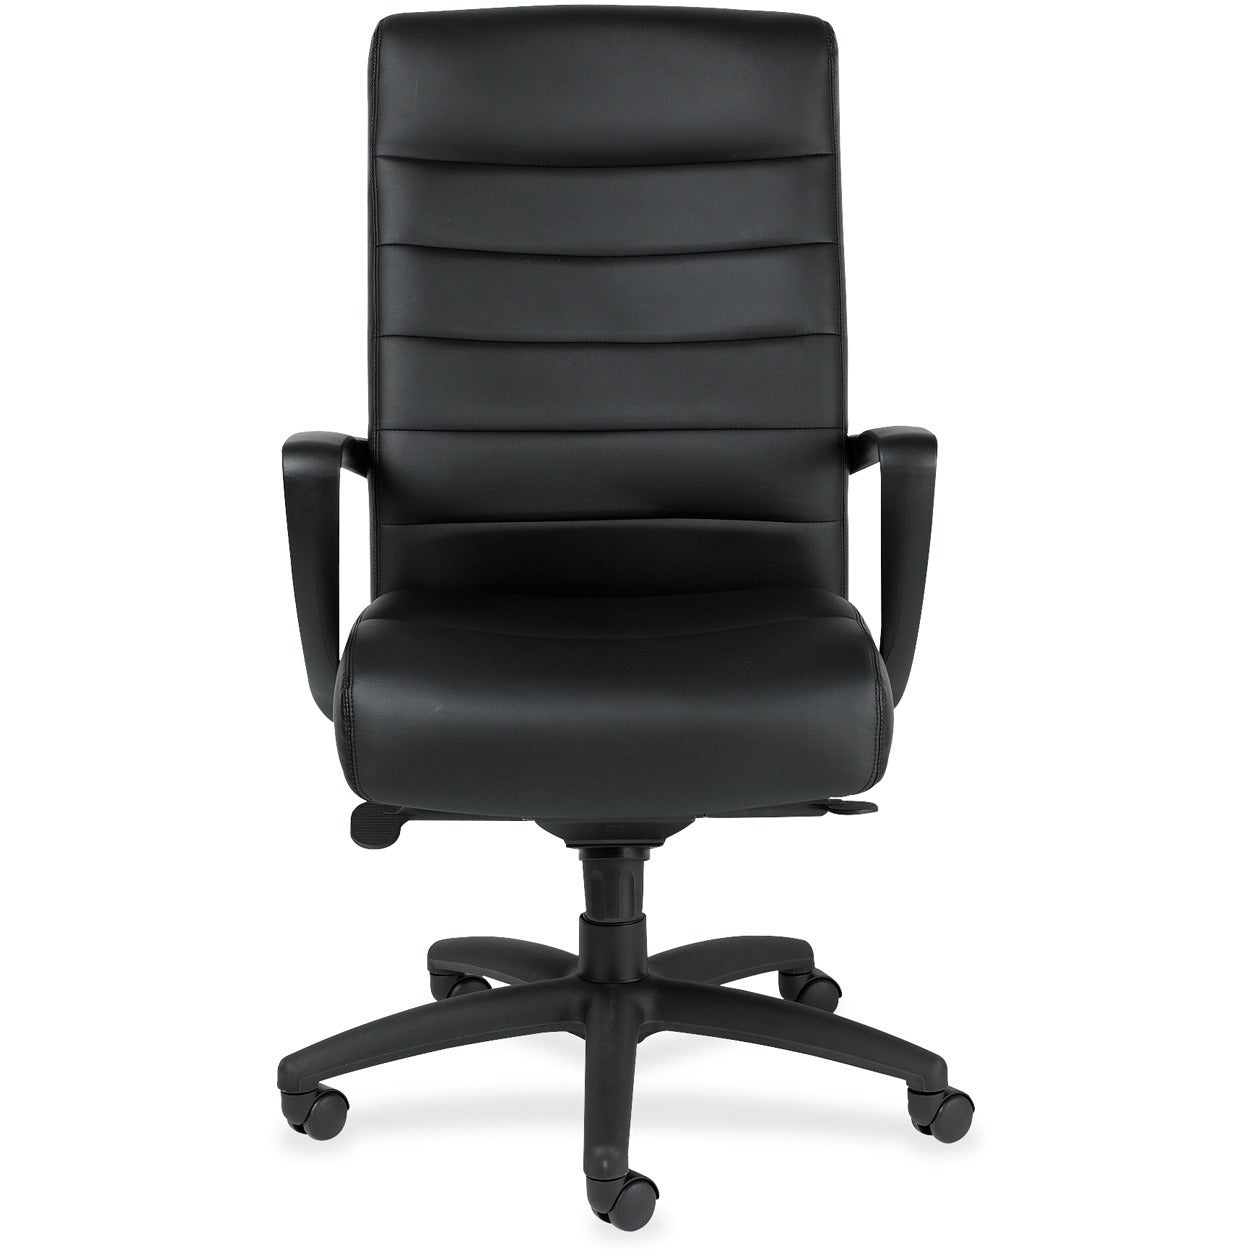 Eurotech Manchester High Back Executive Chair - Black Leather Seat - Black Leather Back - Steel Frame - 5-star Base - 1 Each - 2